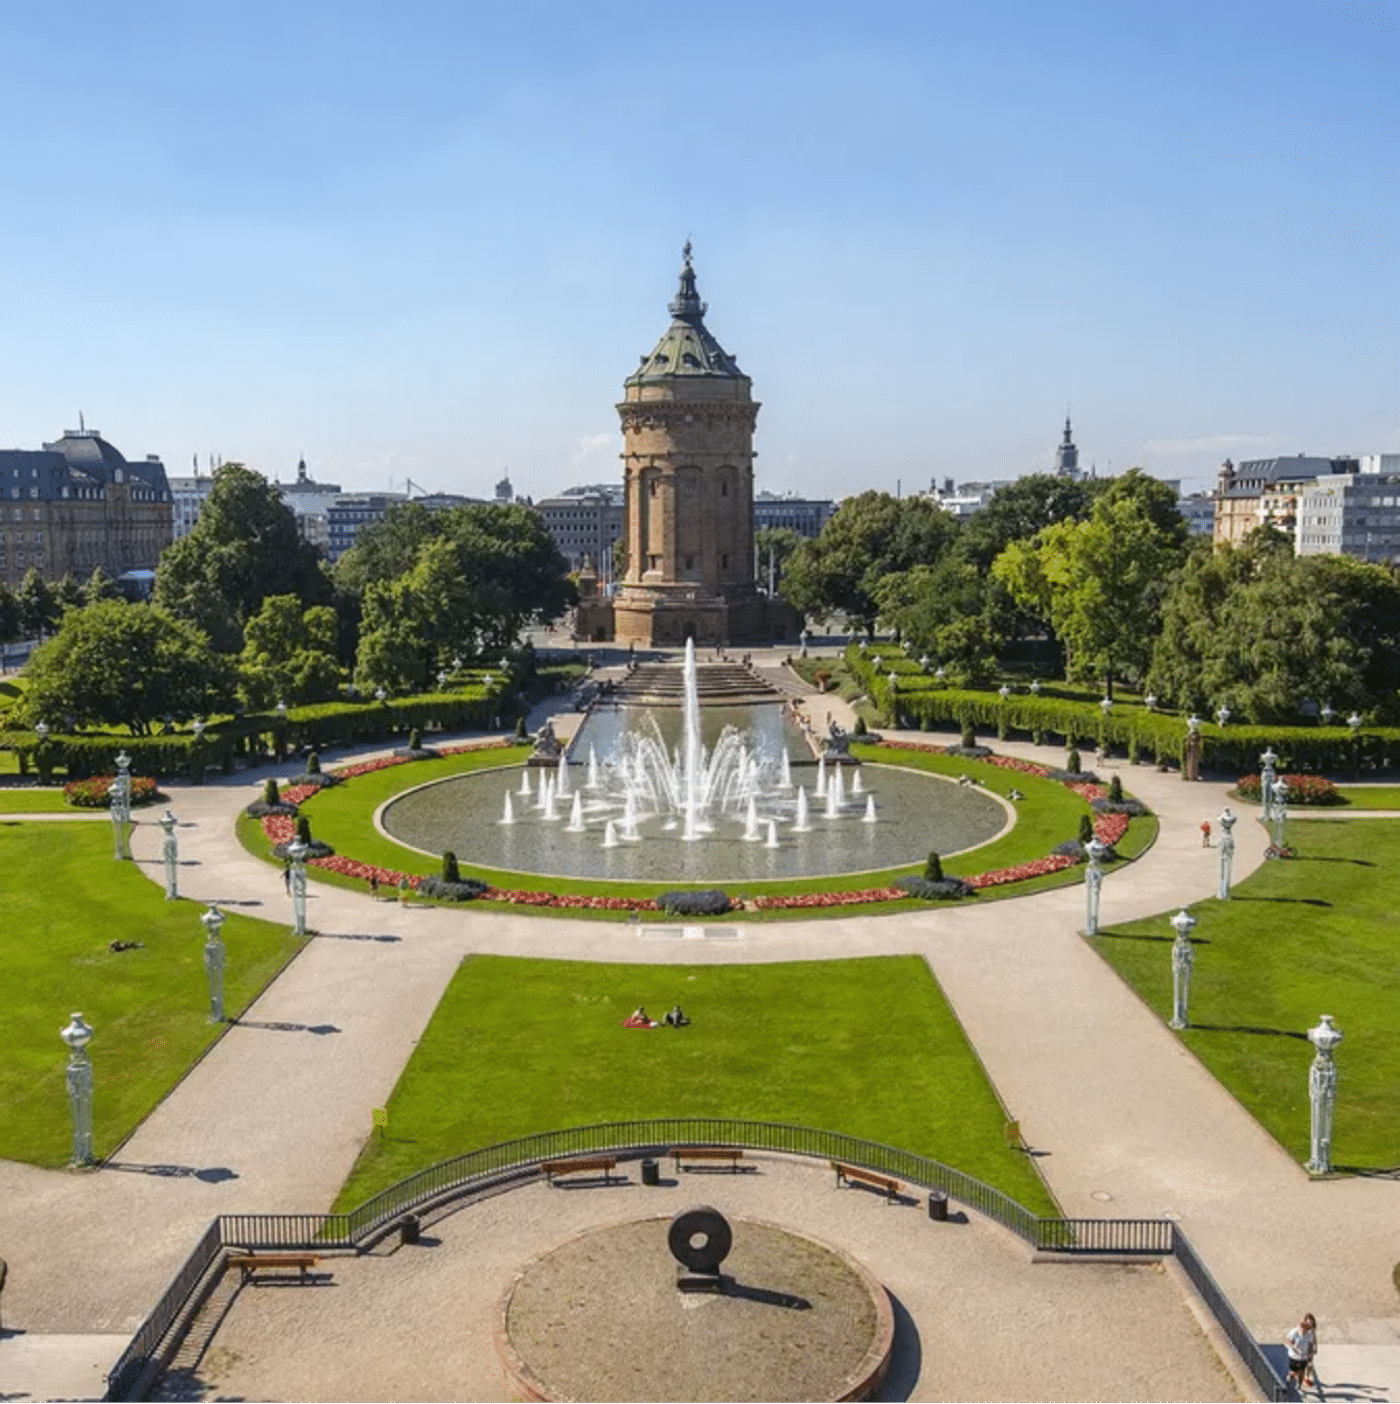 Discover
Mannheim
in a whole new way.